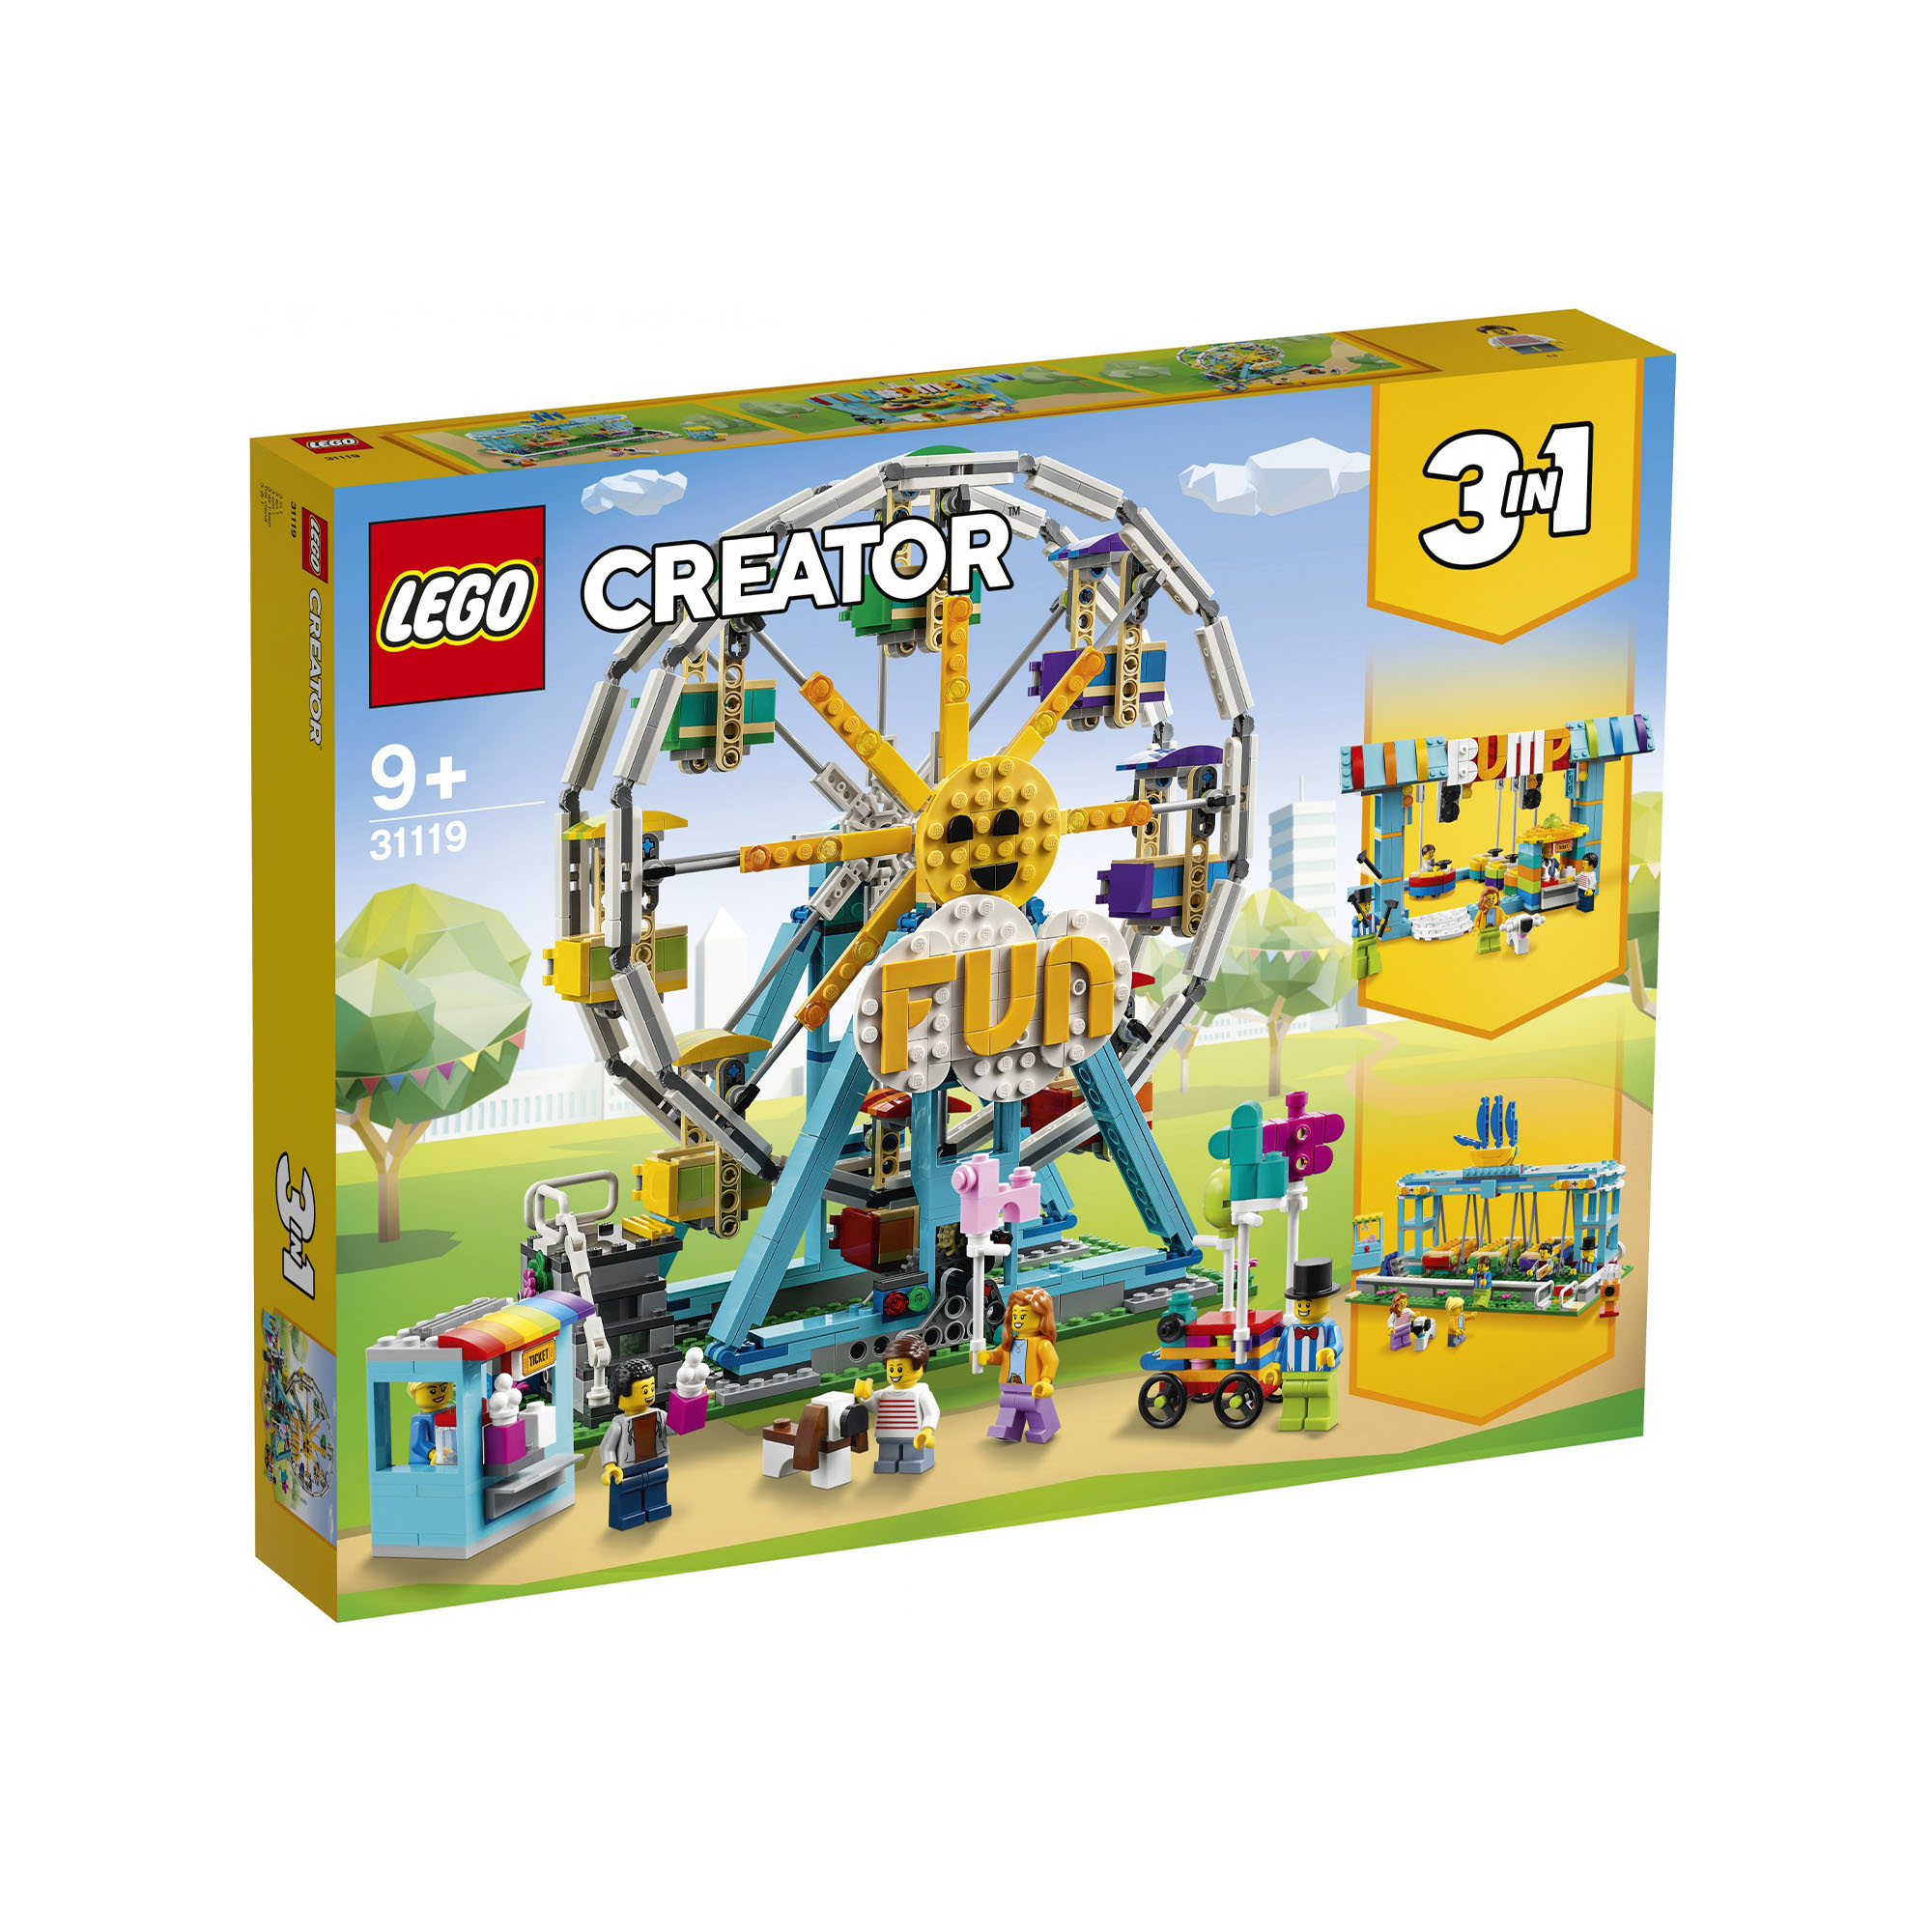 LEGO Creator 3 in 1 Ruota Panoramica, Autoscontro e Giostra, Playset Parco Gioch 31119, , large